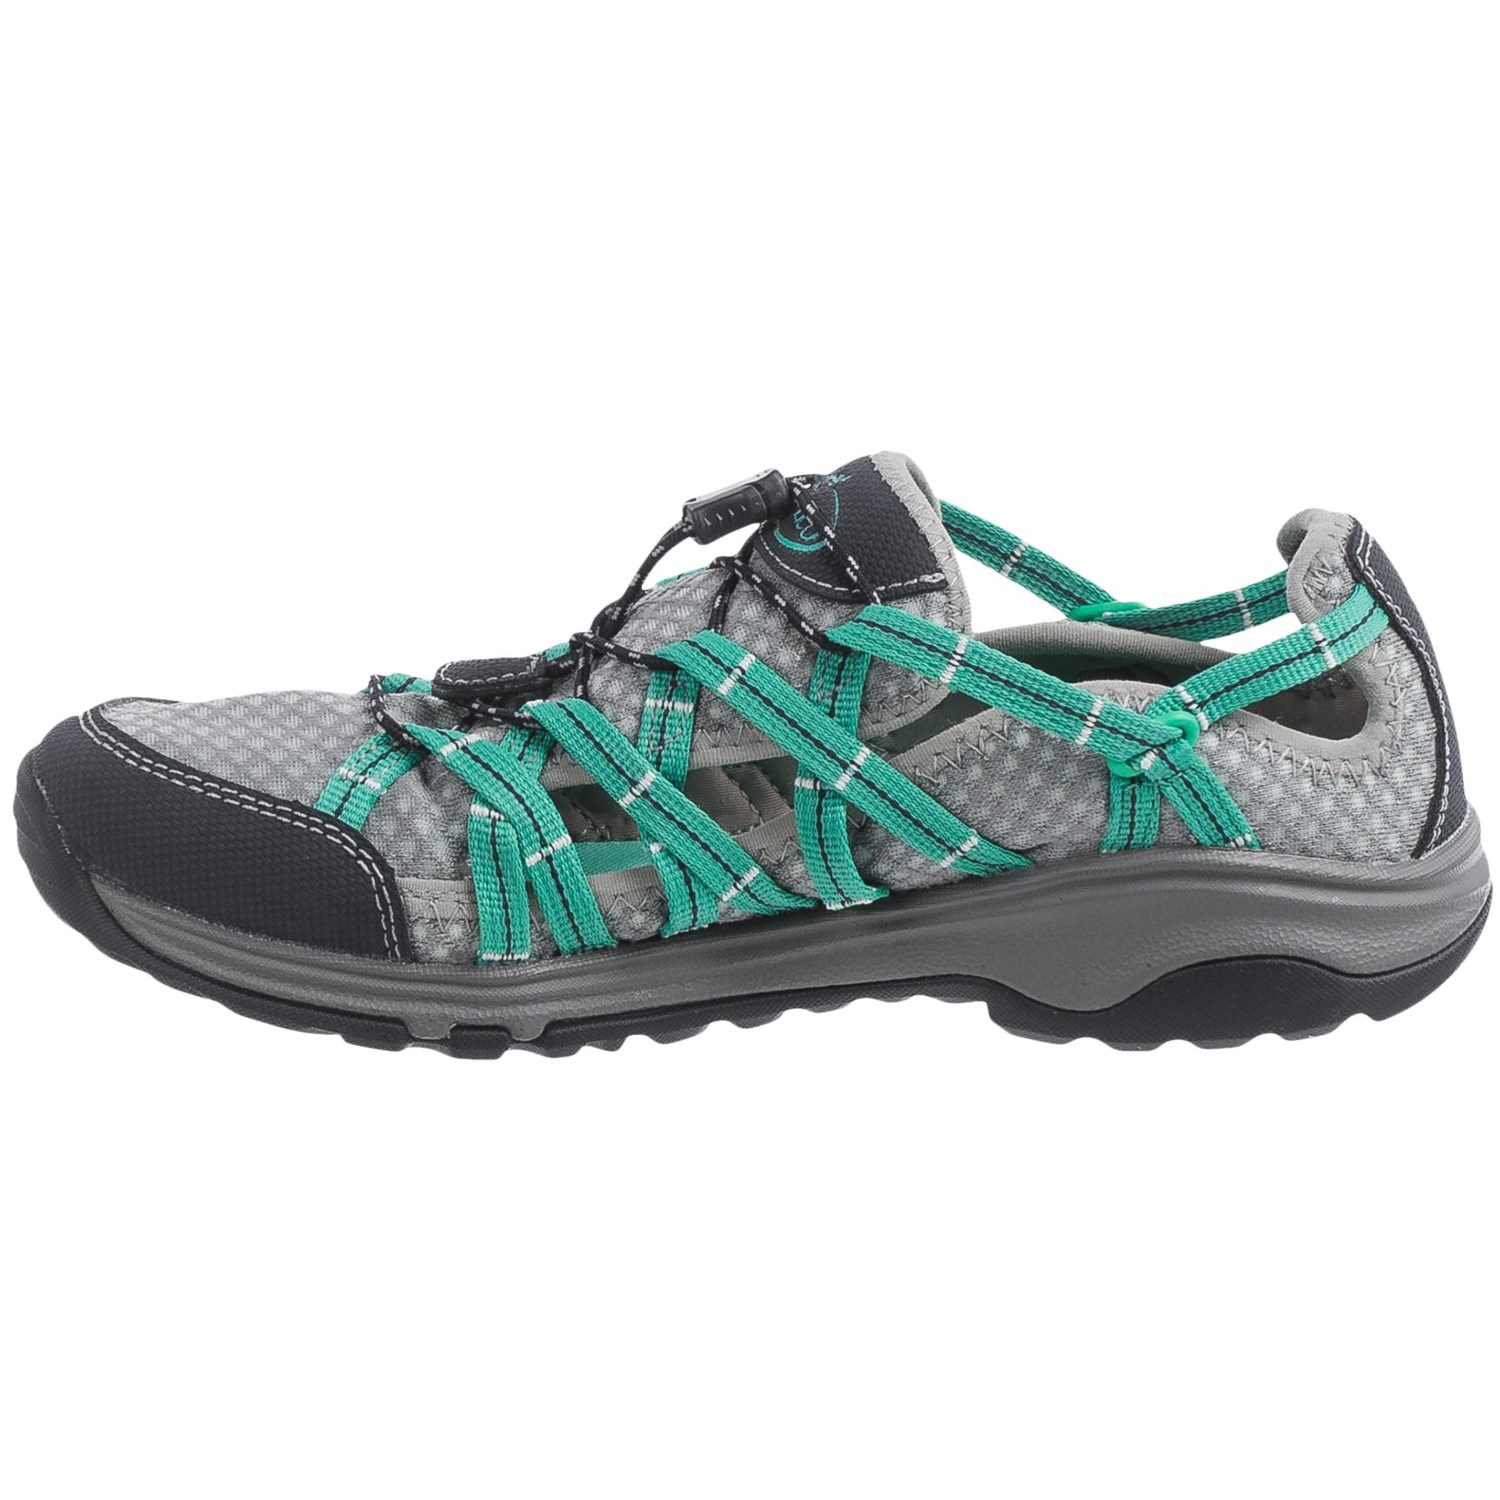 Chaco OutCross Evo Free Water Shoes (For Women) - Save 45%